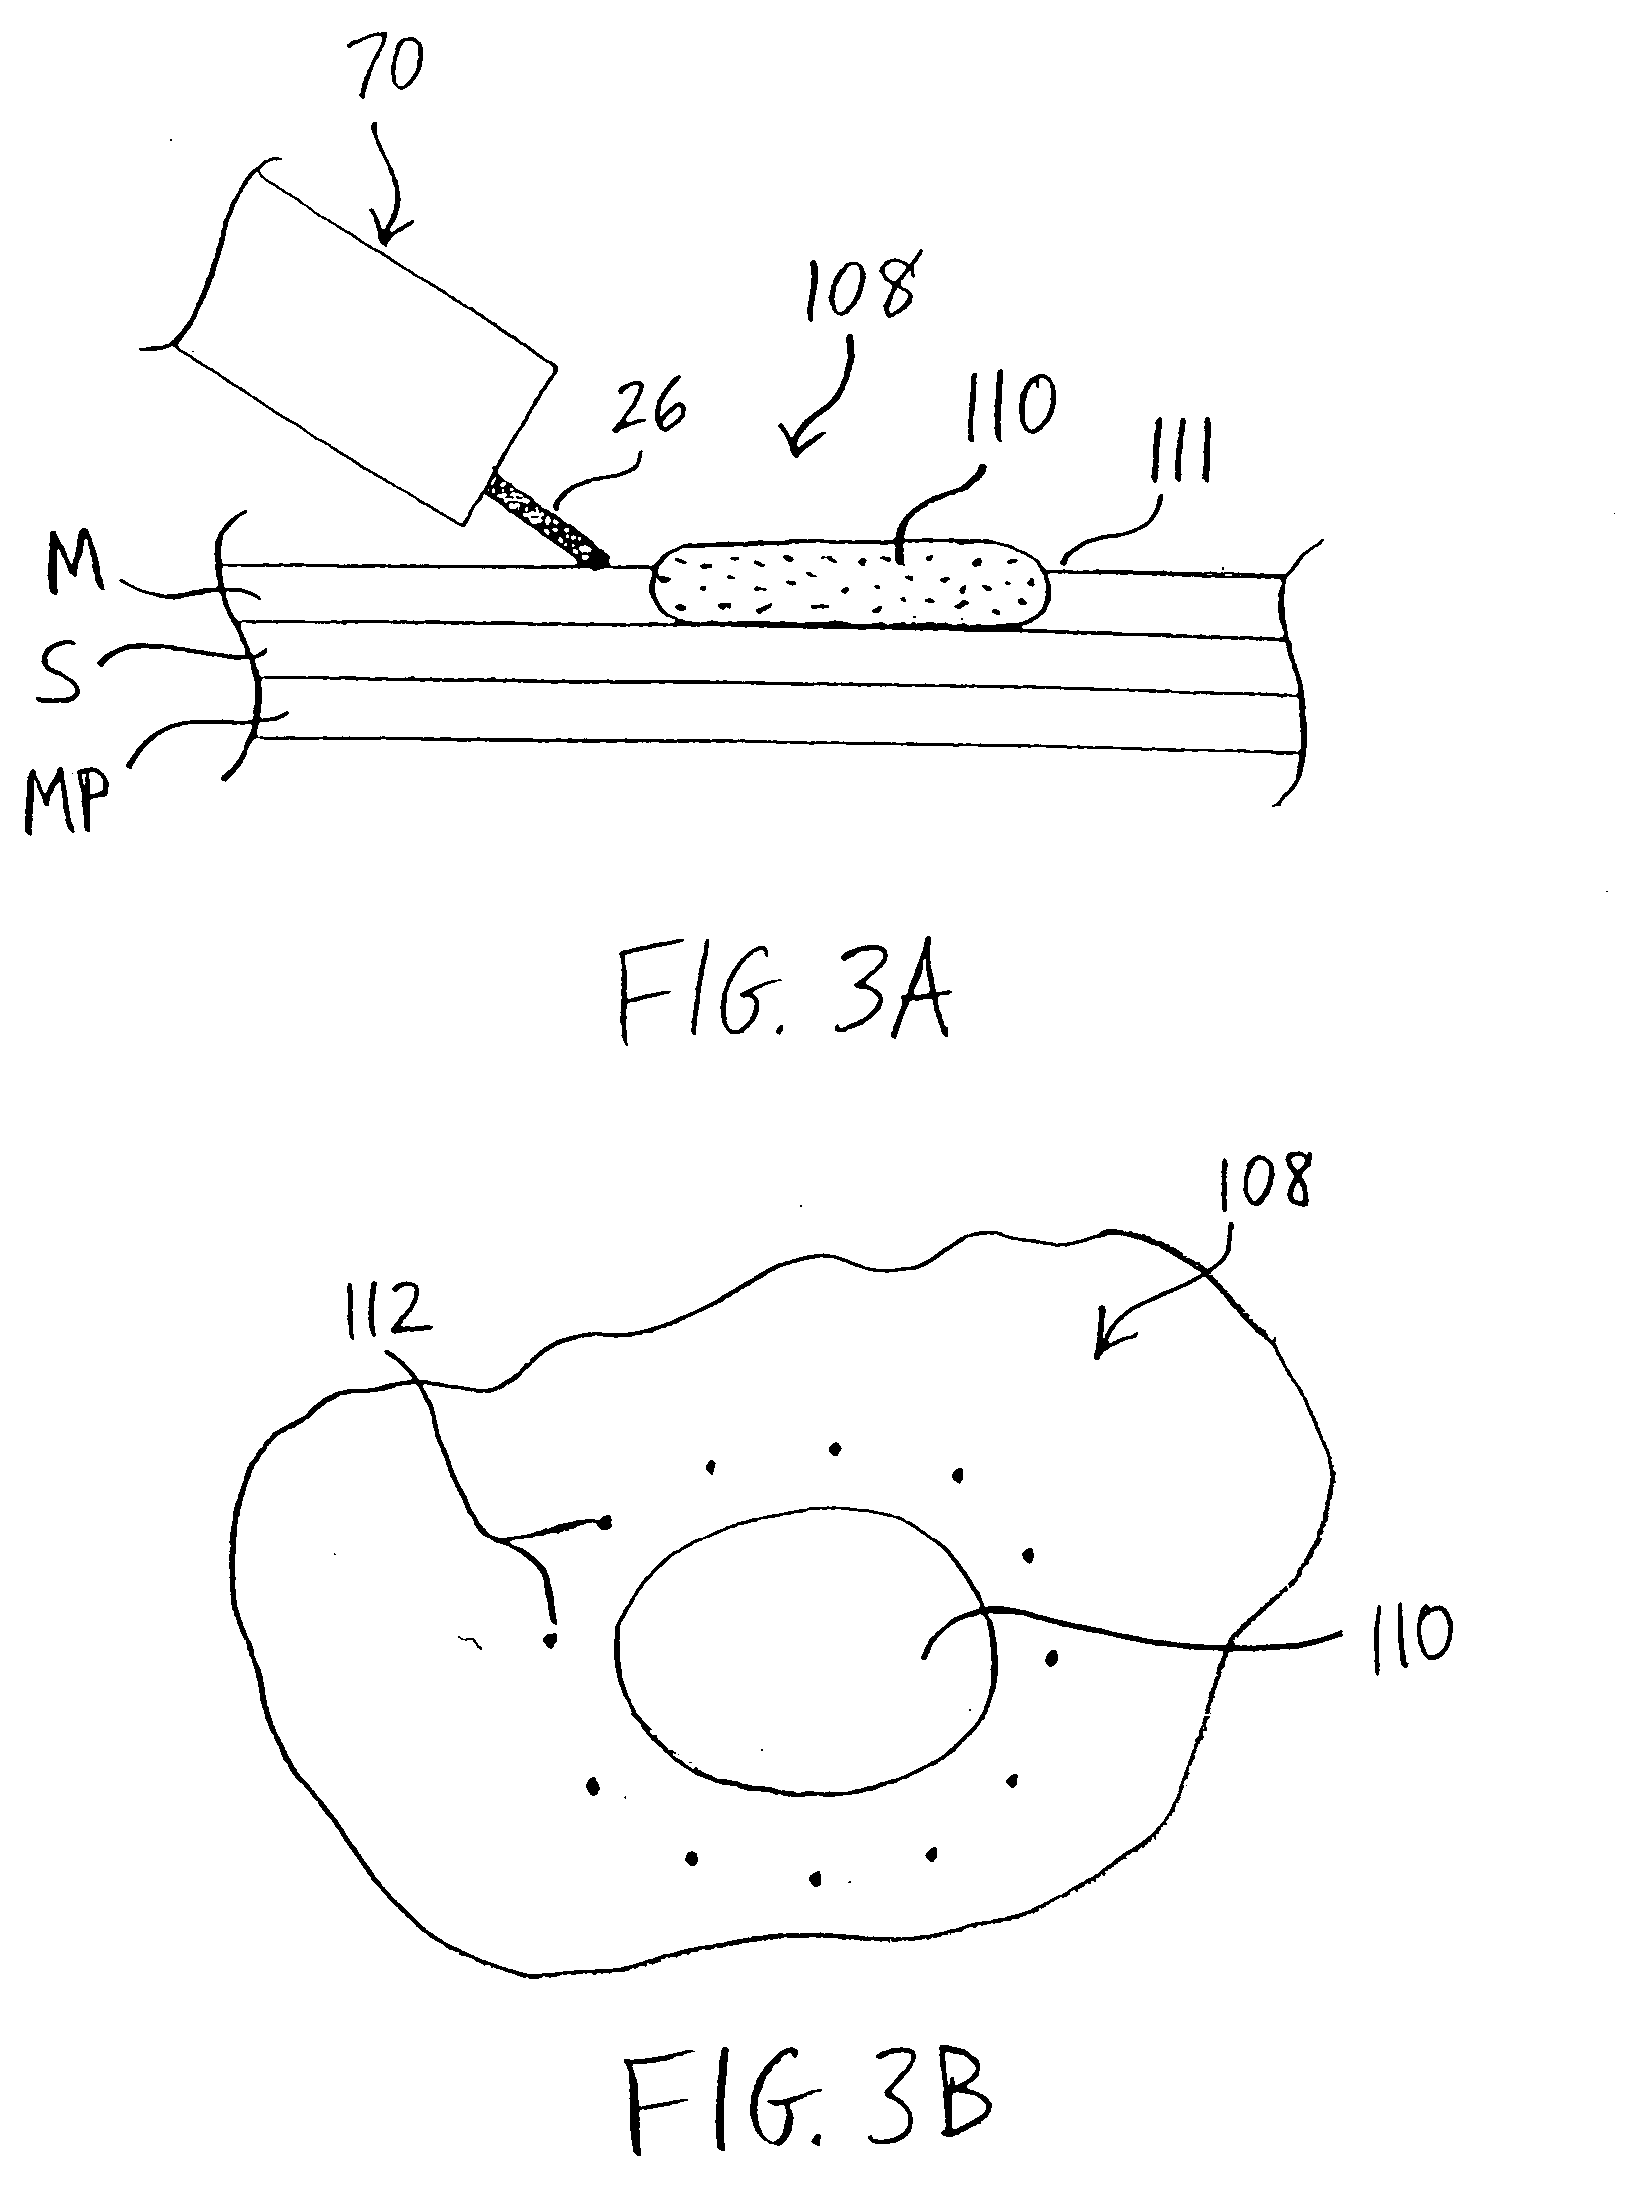 Apparatus and methods for endoscopic resection of tissue